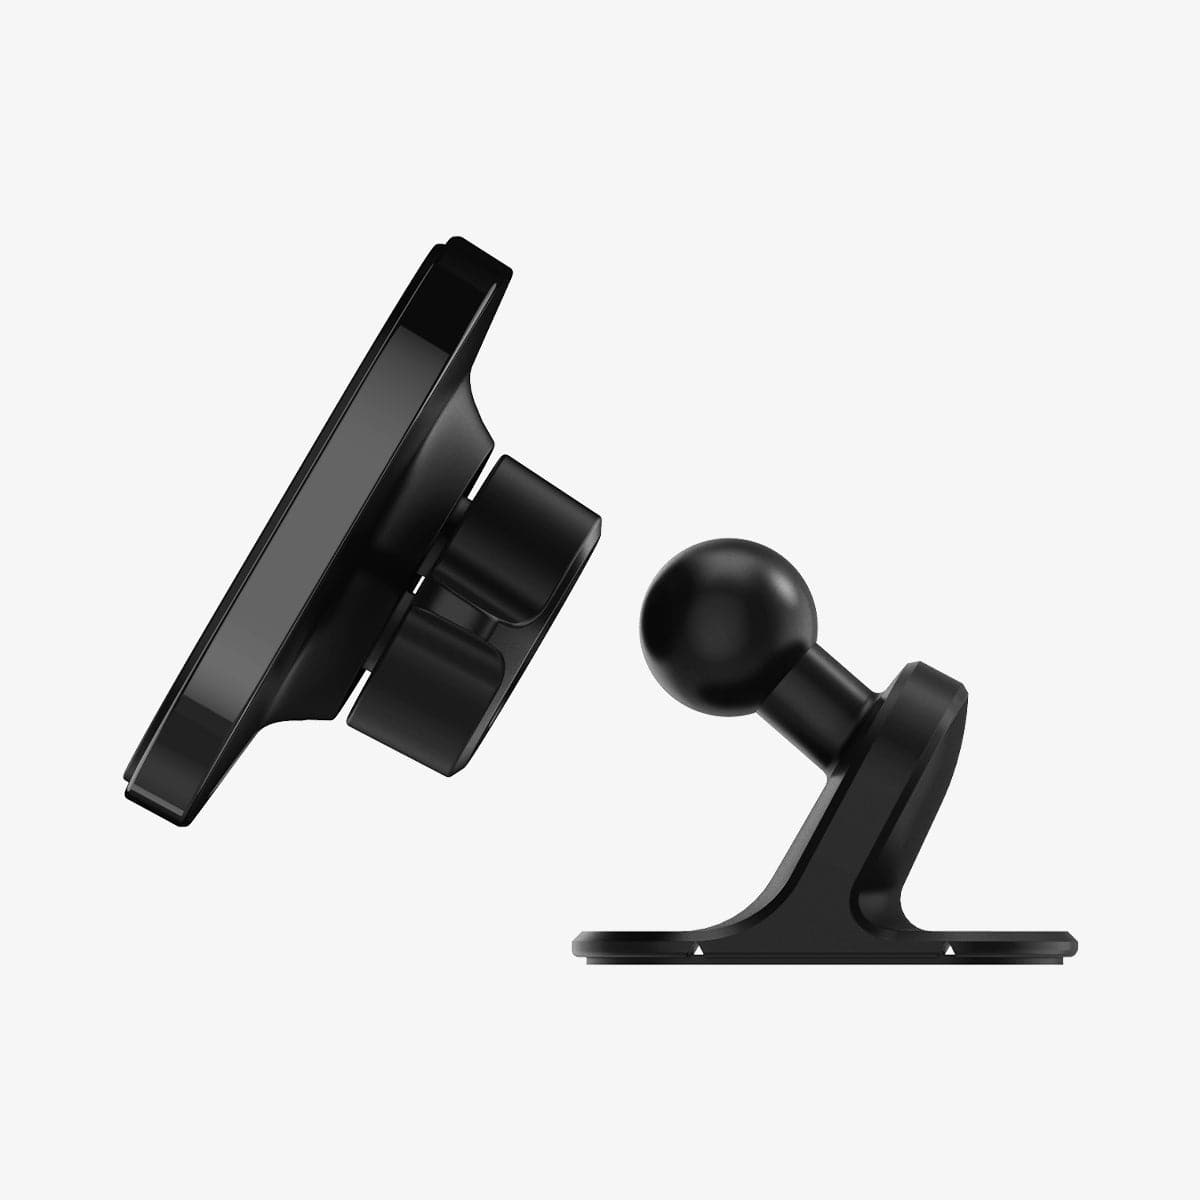 ACP03792 - MagFit Adhesive Car Mount (MagFit) in black showing the side view of the two parts of car mount